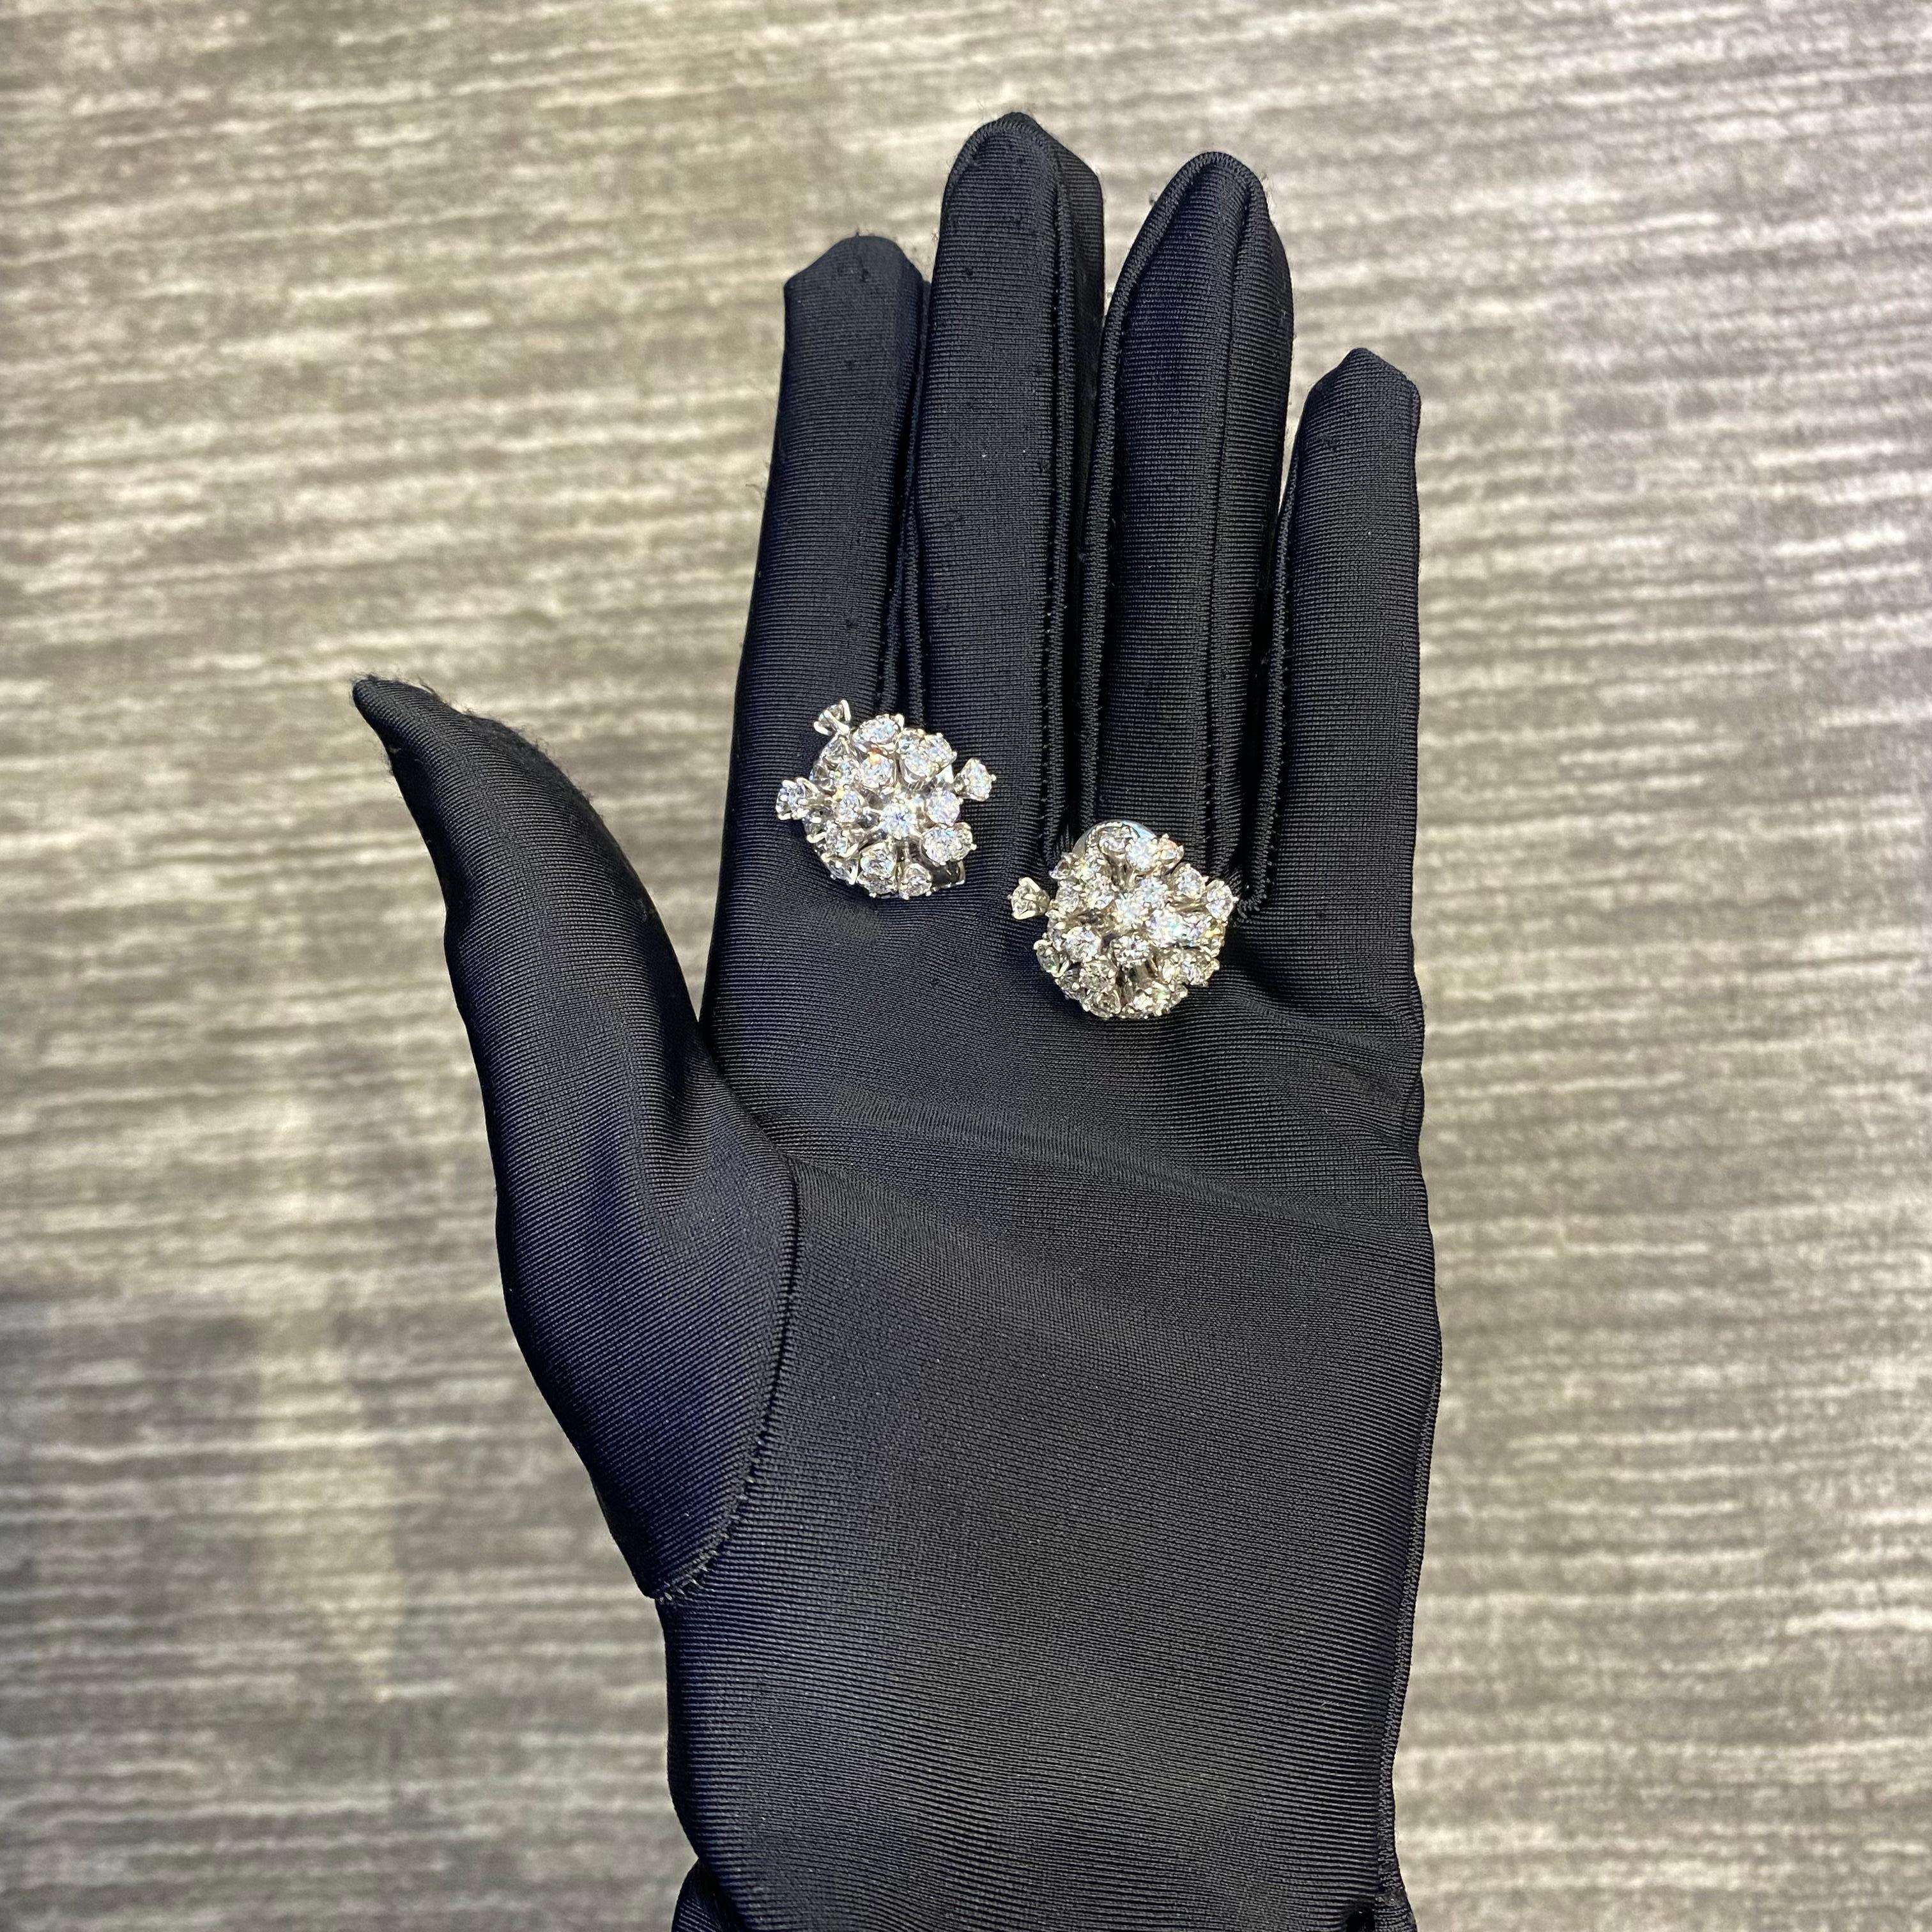 Diamond Cluster Earrings  In Excellent Condition For Sale In New York, NY